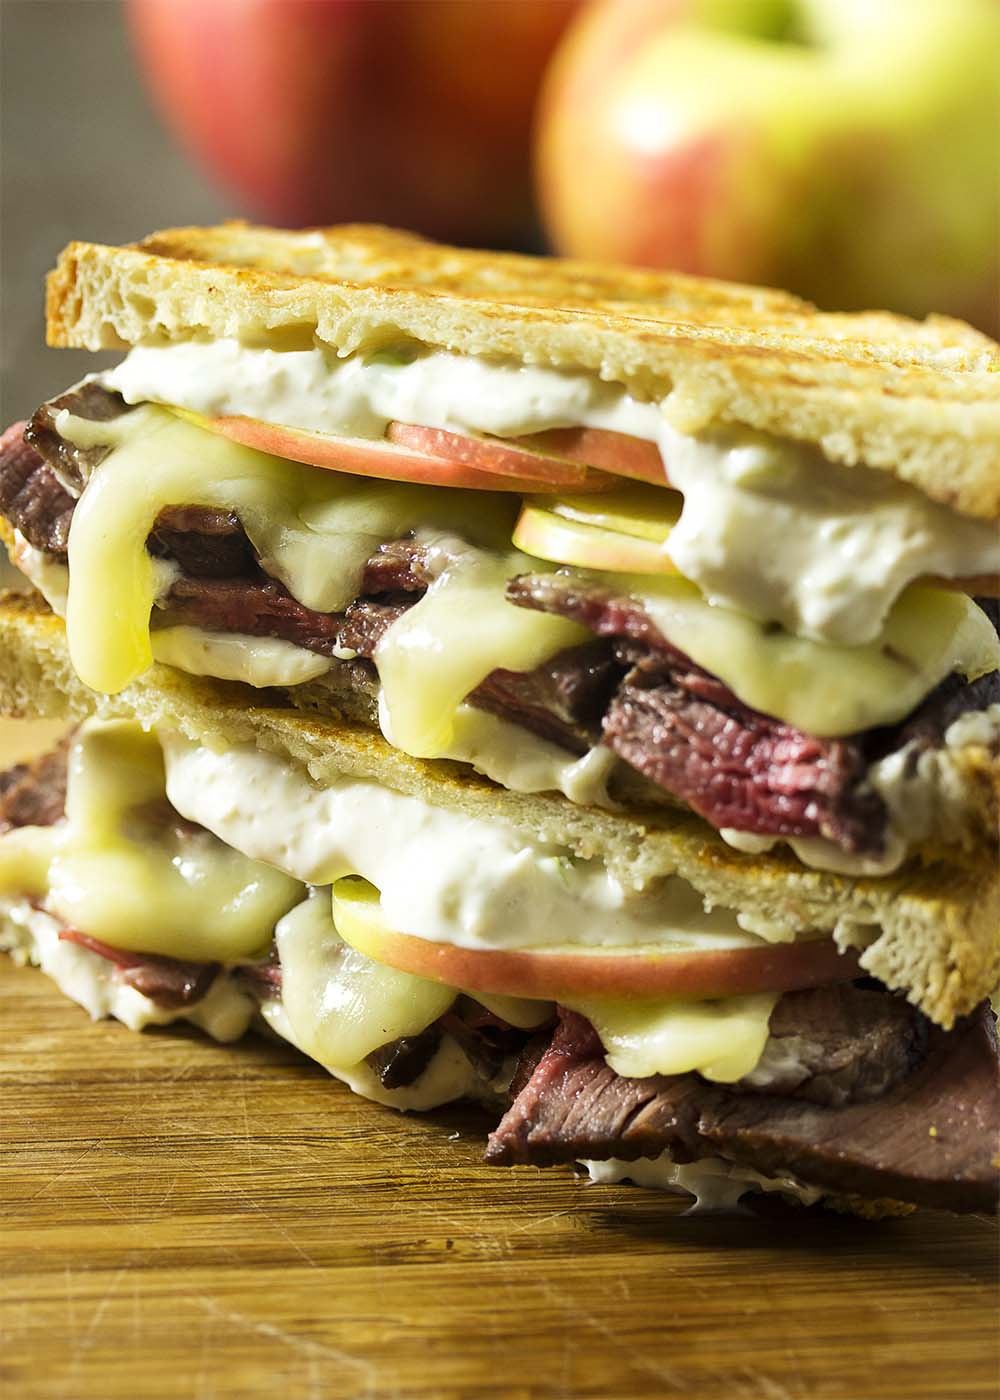 What to do with leftover roast beef? Layer it up on sourdough bread with apples, cheddar, and horseradish sauce for a roast beef panini! Great for lunch or dinner. | justalittlebitofbacon.com